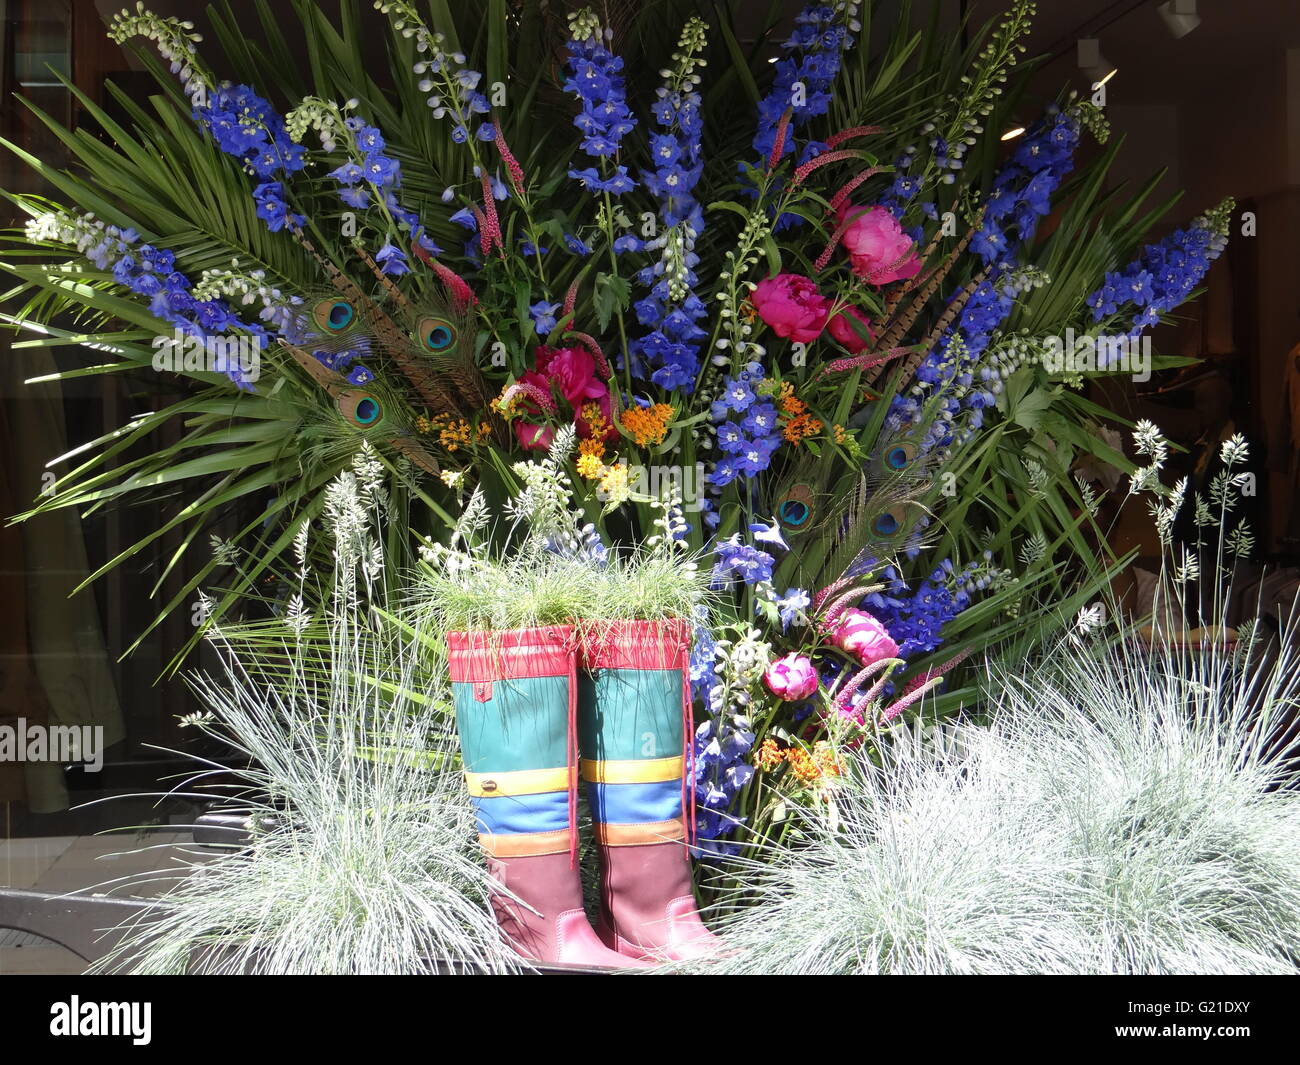 Chelsea is getting ready for Chelsea Flower Show 2016, London, UK, 22 May 2016 Stock Photo